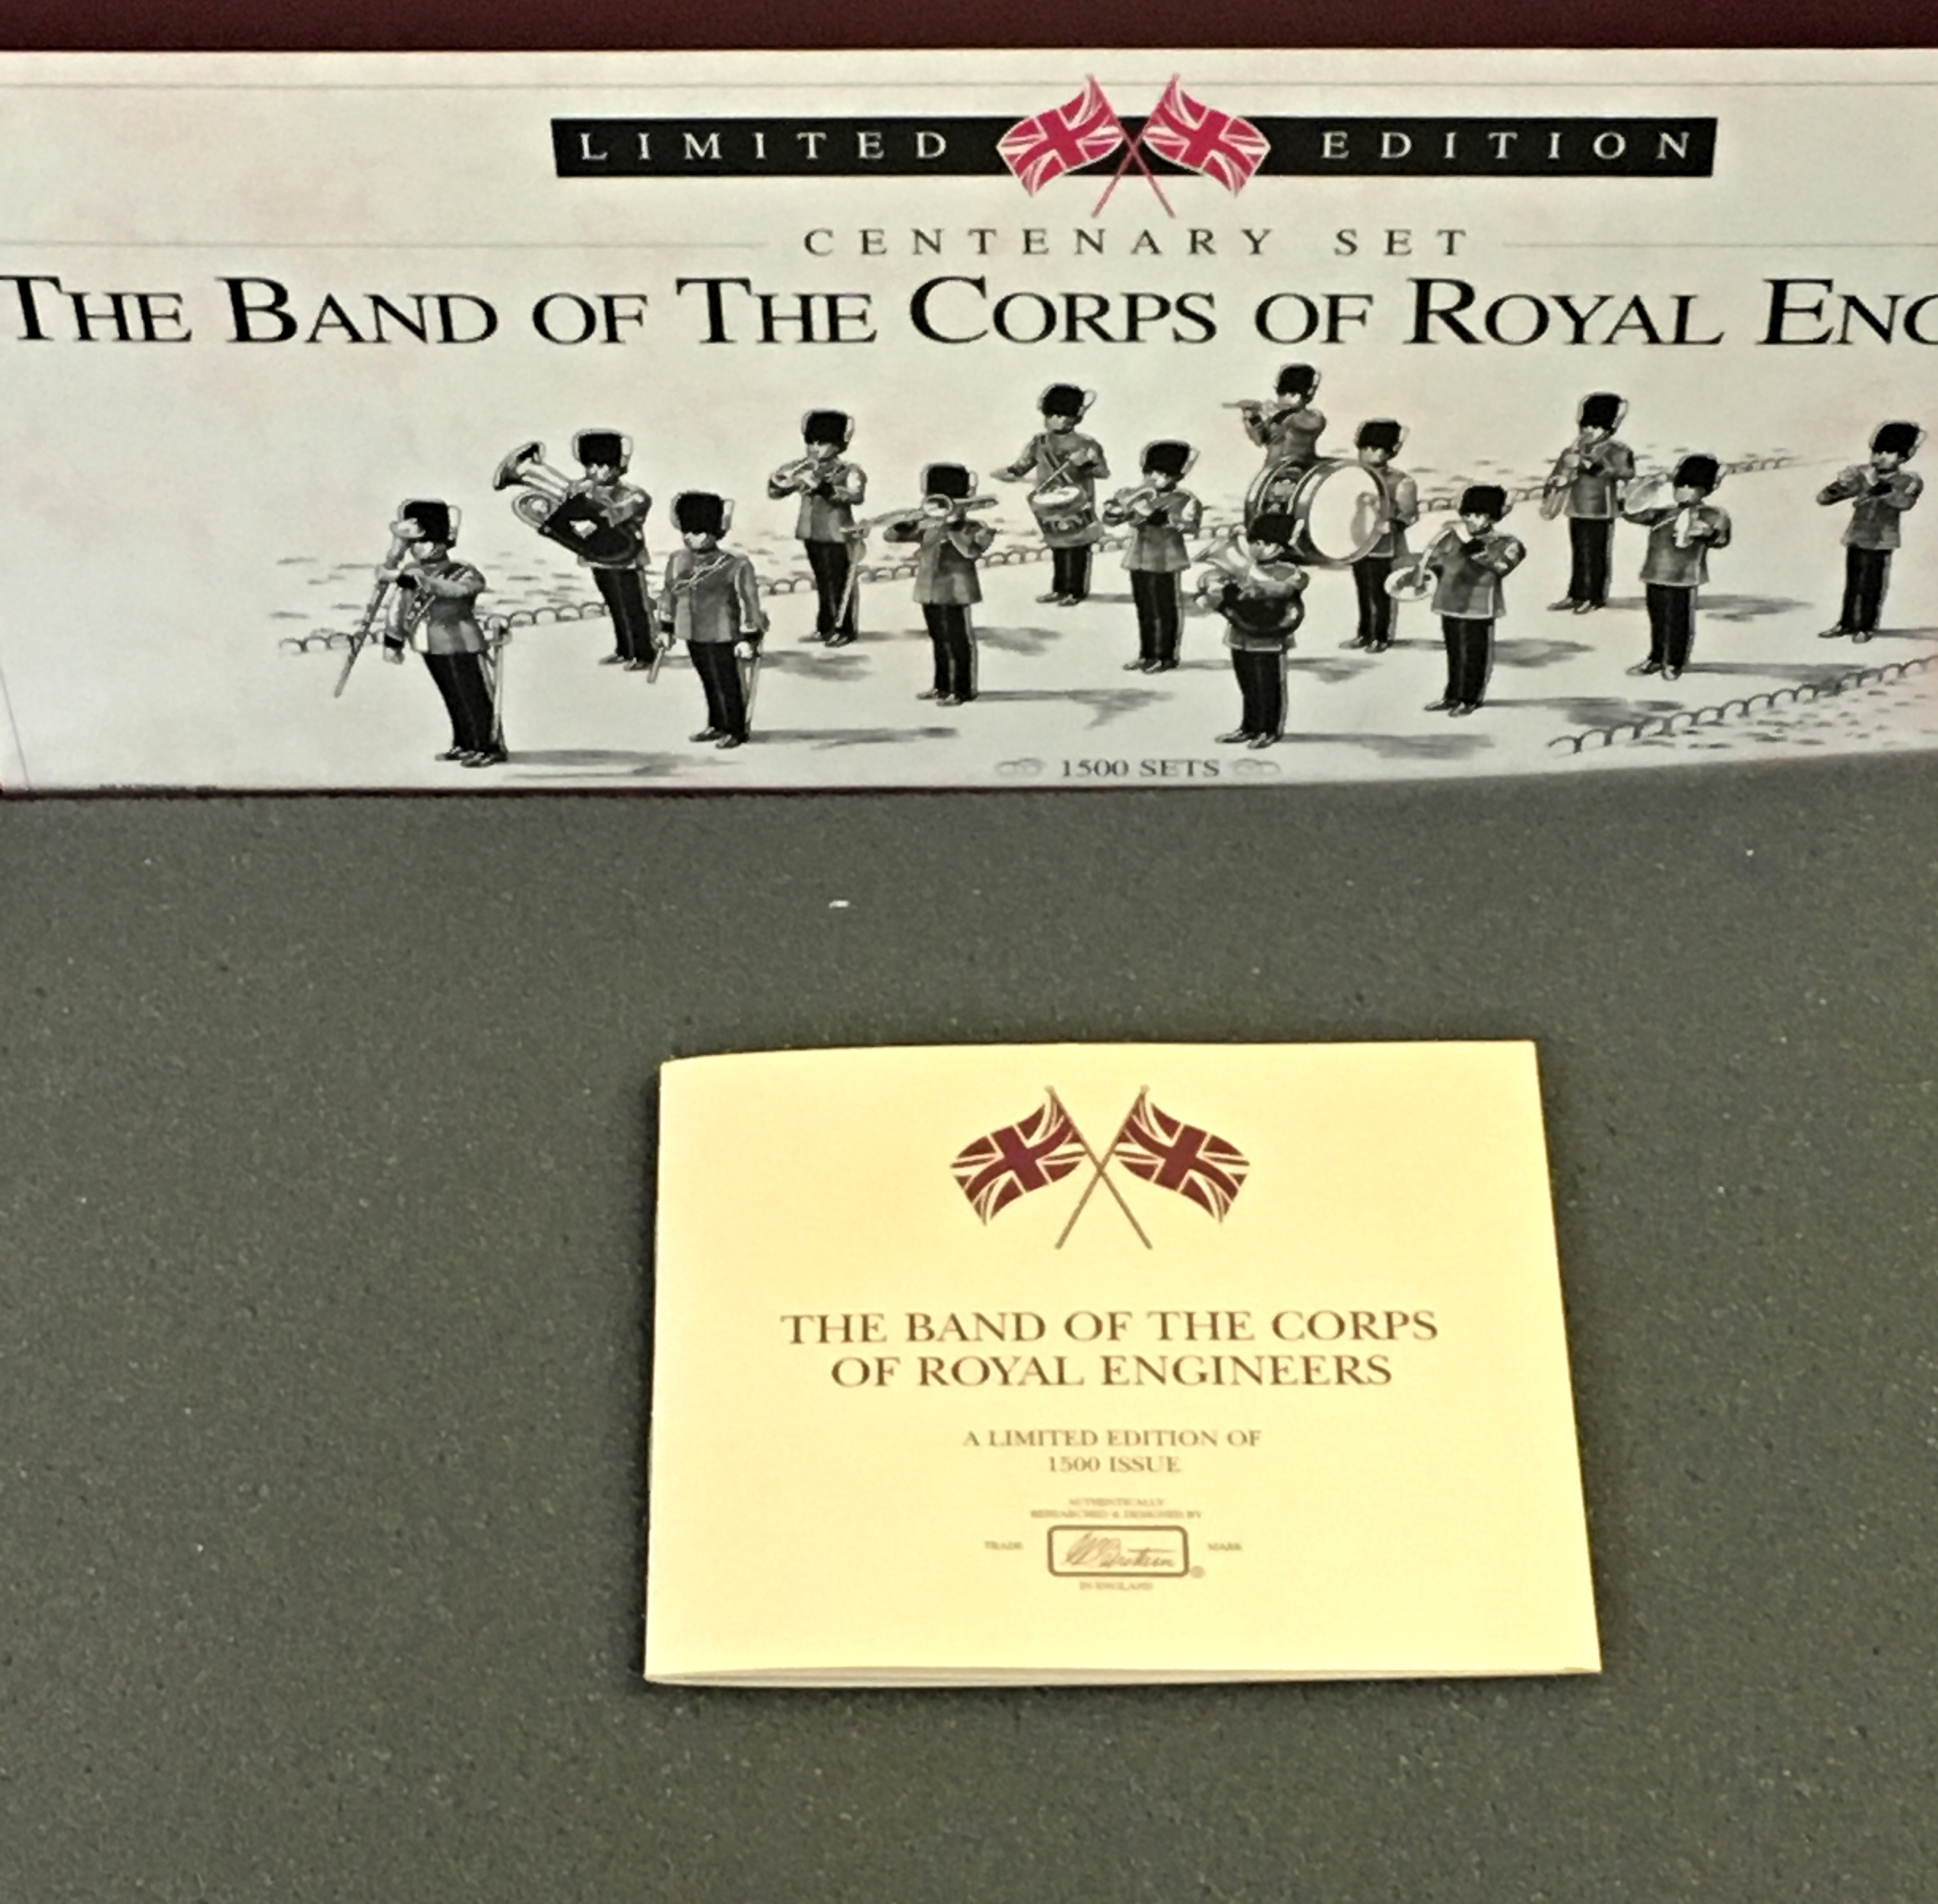 Britains Soldiers - Modern release limited edition boxed Centenary set - The Band of the Corps of - Image 6 of 7